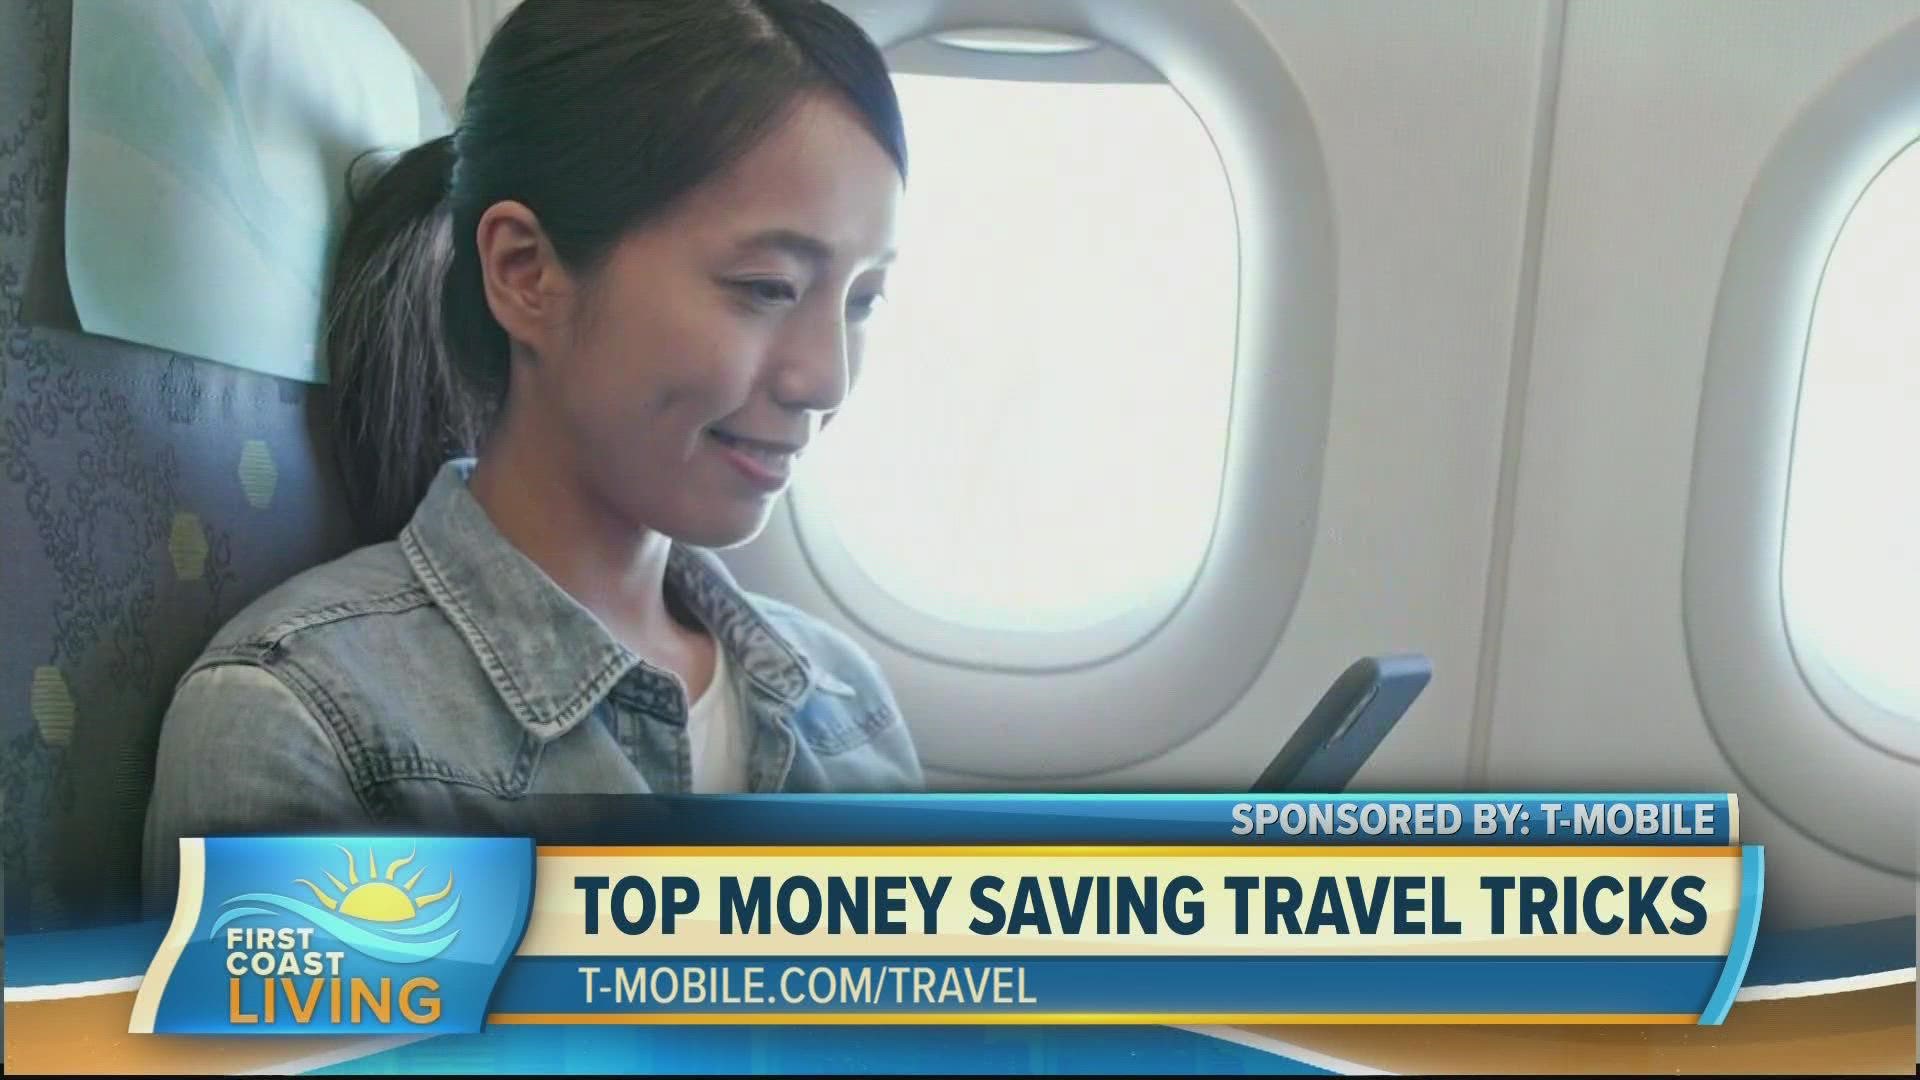 Travel expert, Brian Kelly - aka “The Points Guy” - discusses how to save on travel this summer, whether you're hitting the road or flying abroad.